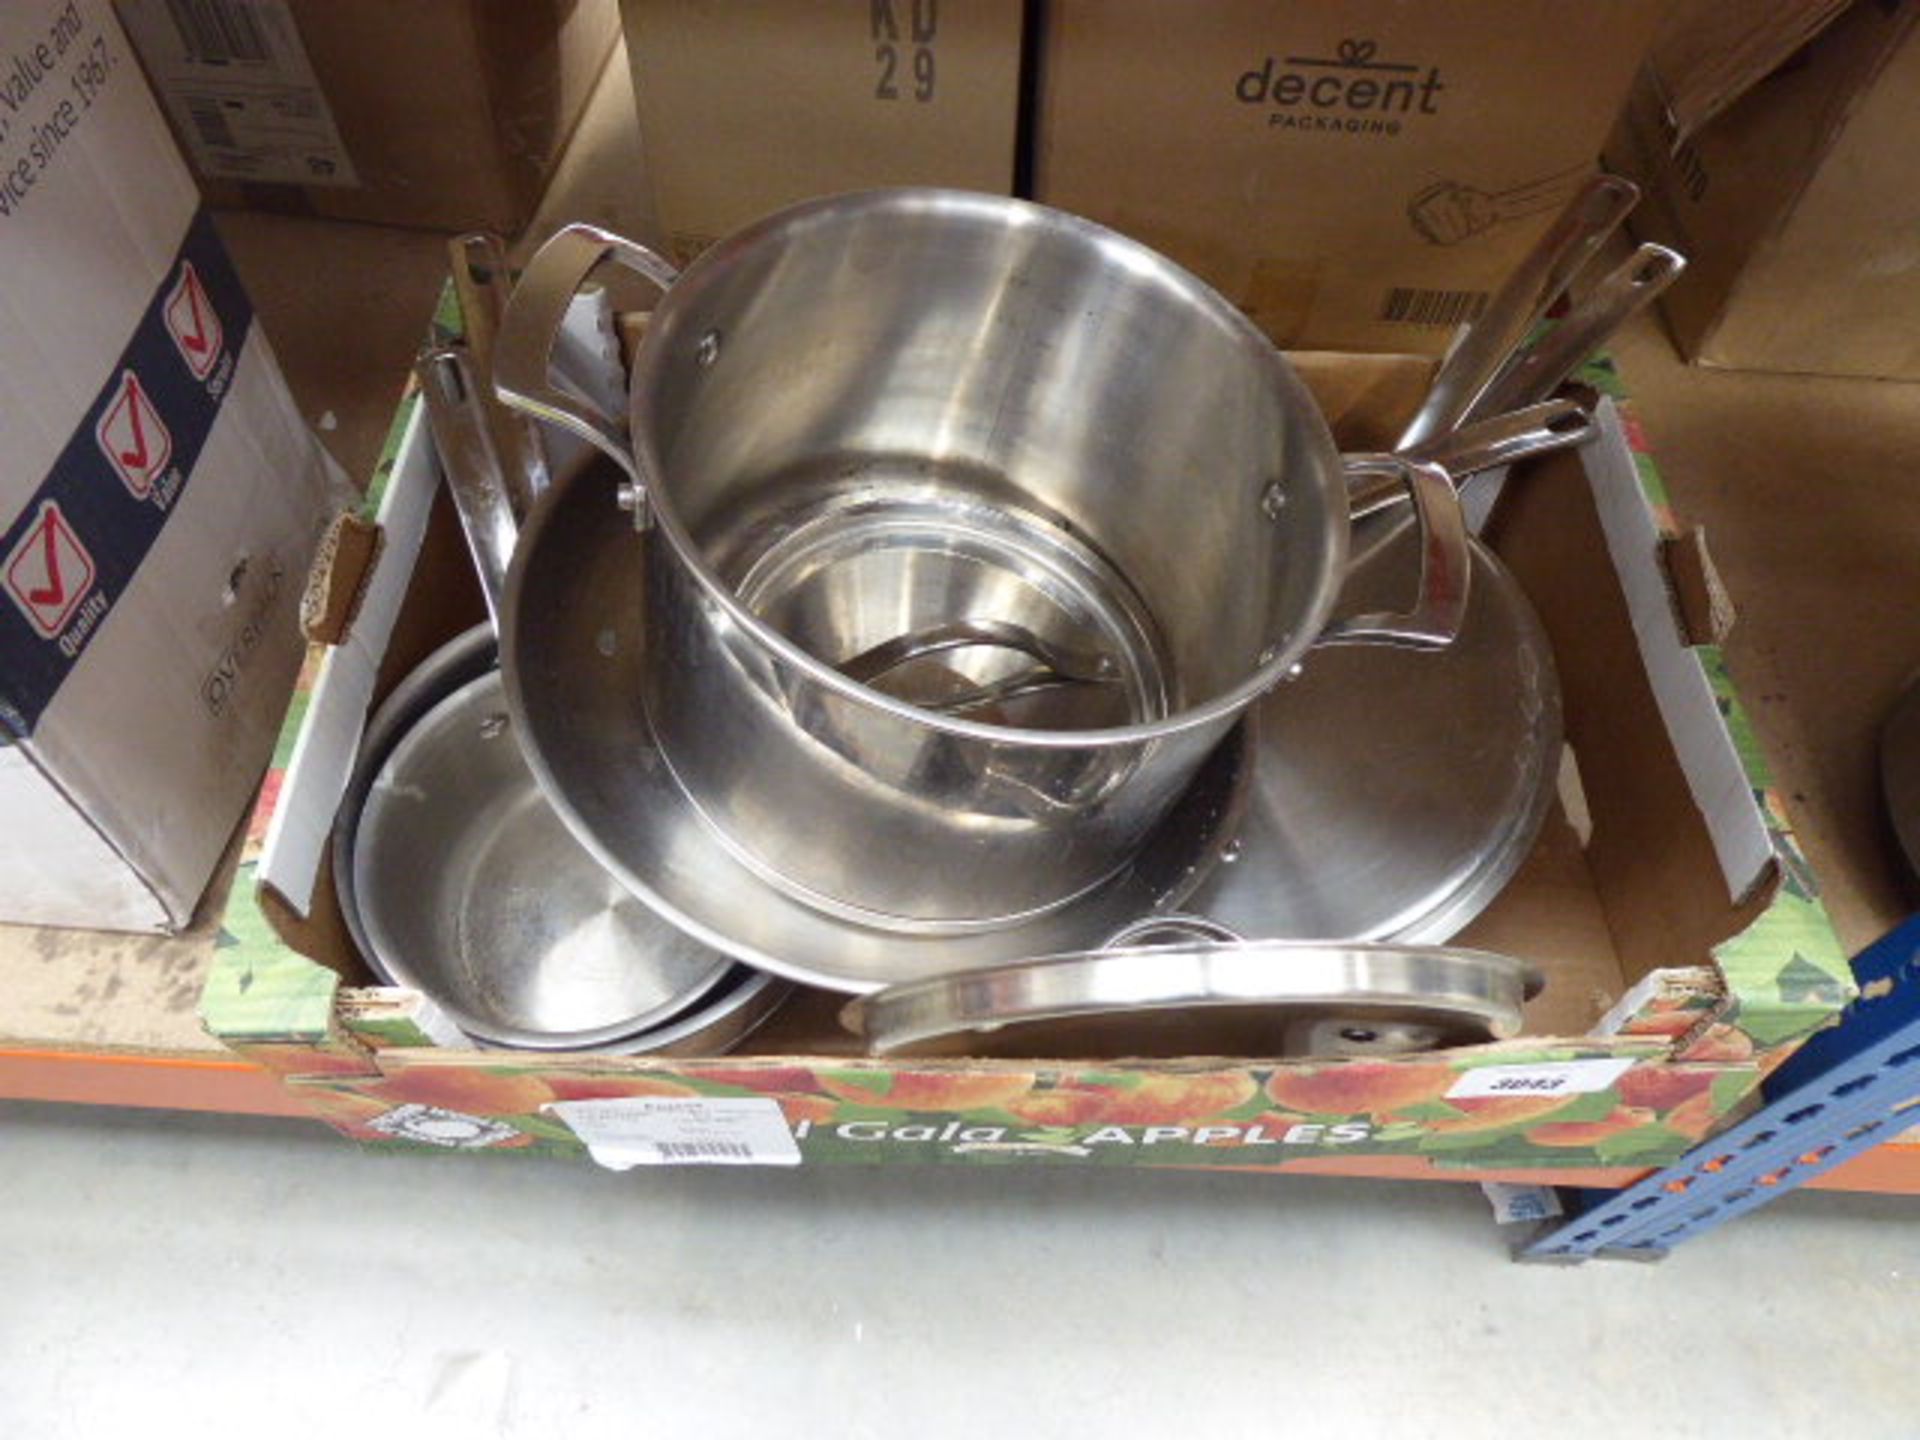 3030 - Tray containing used stainless steel pots and pans